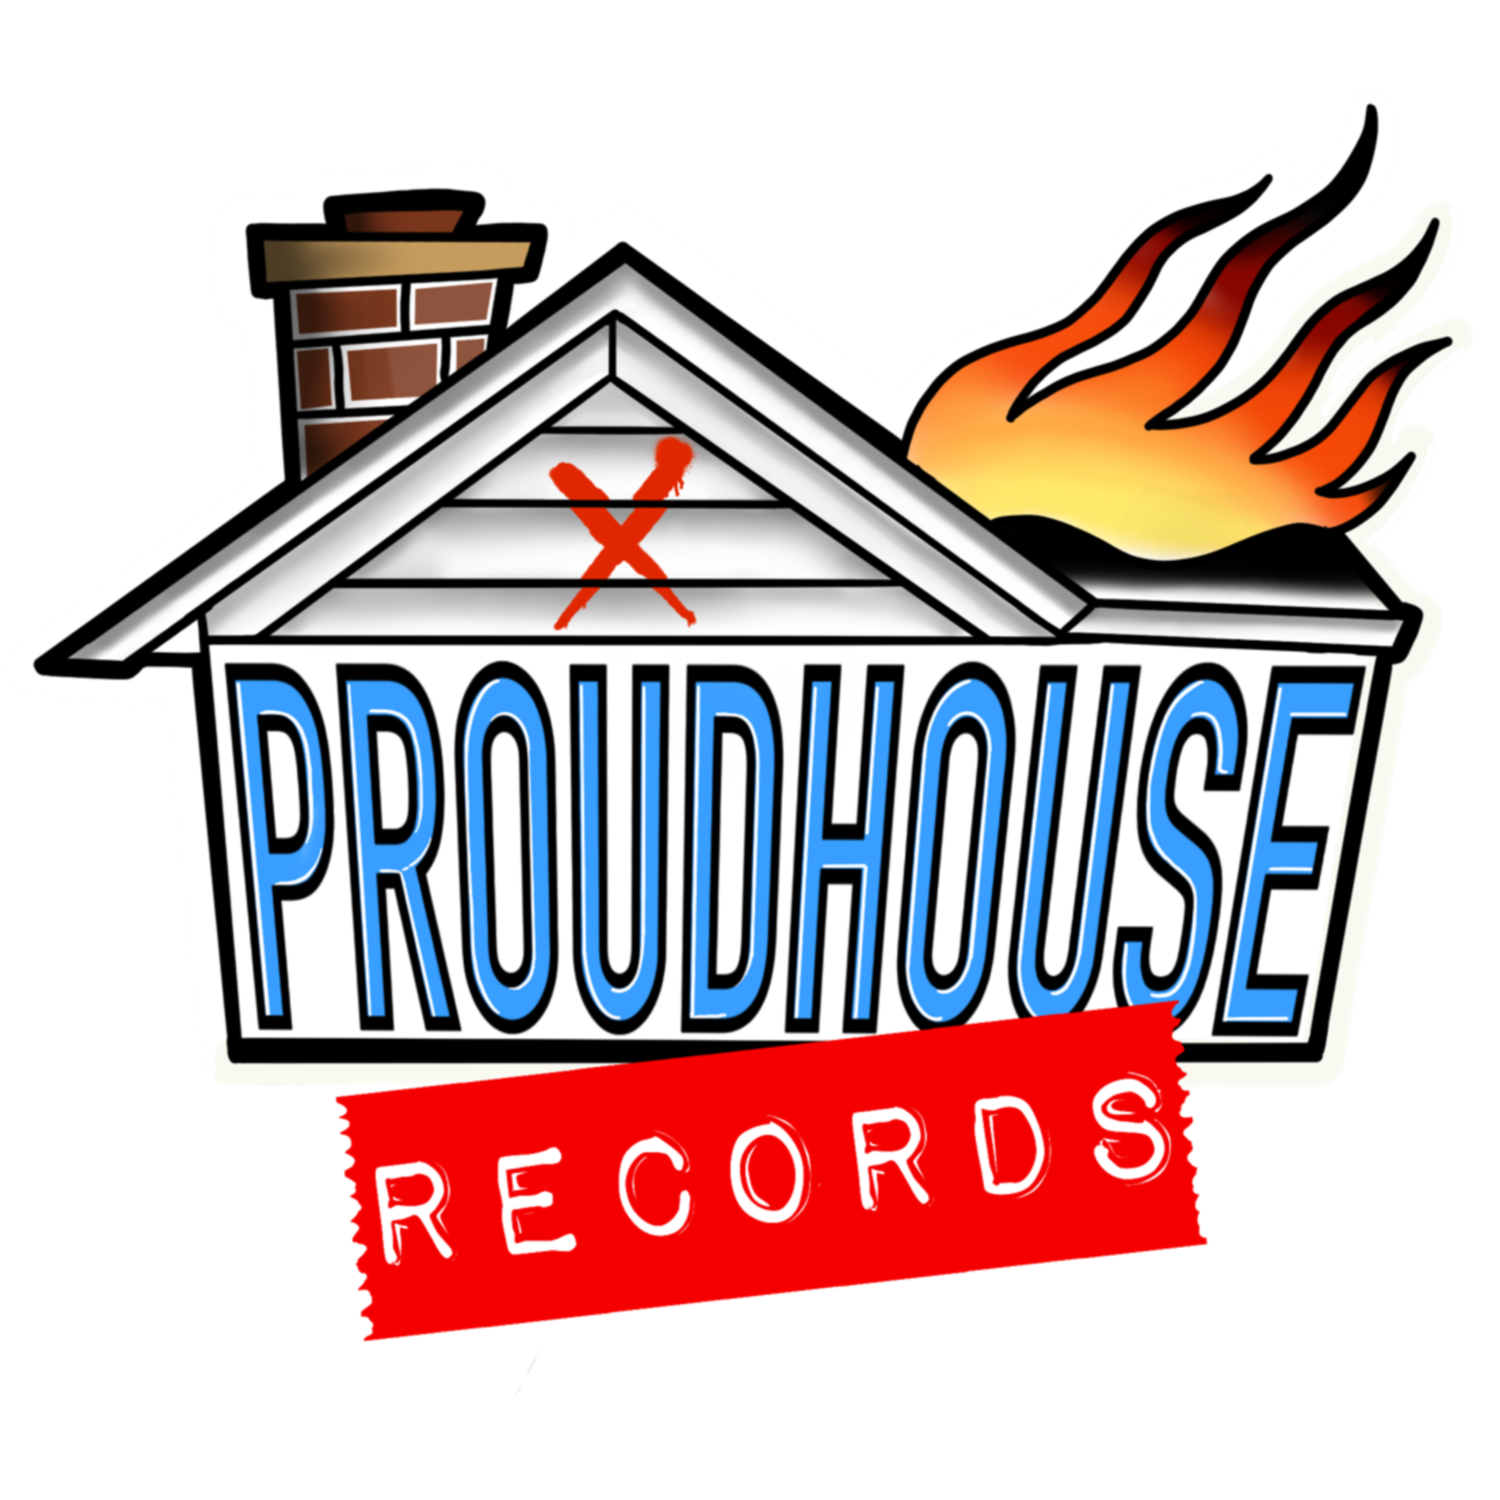 Proudhouse Records